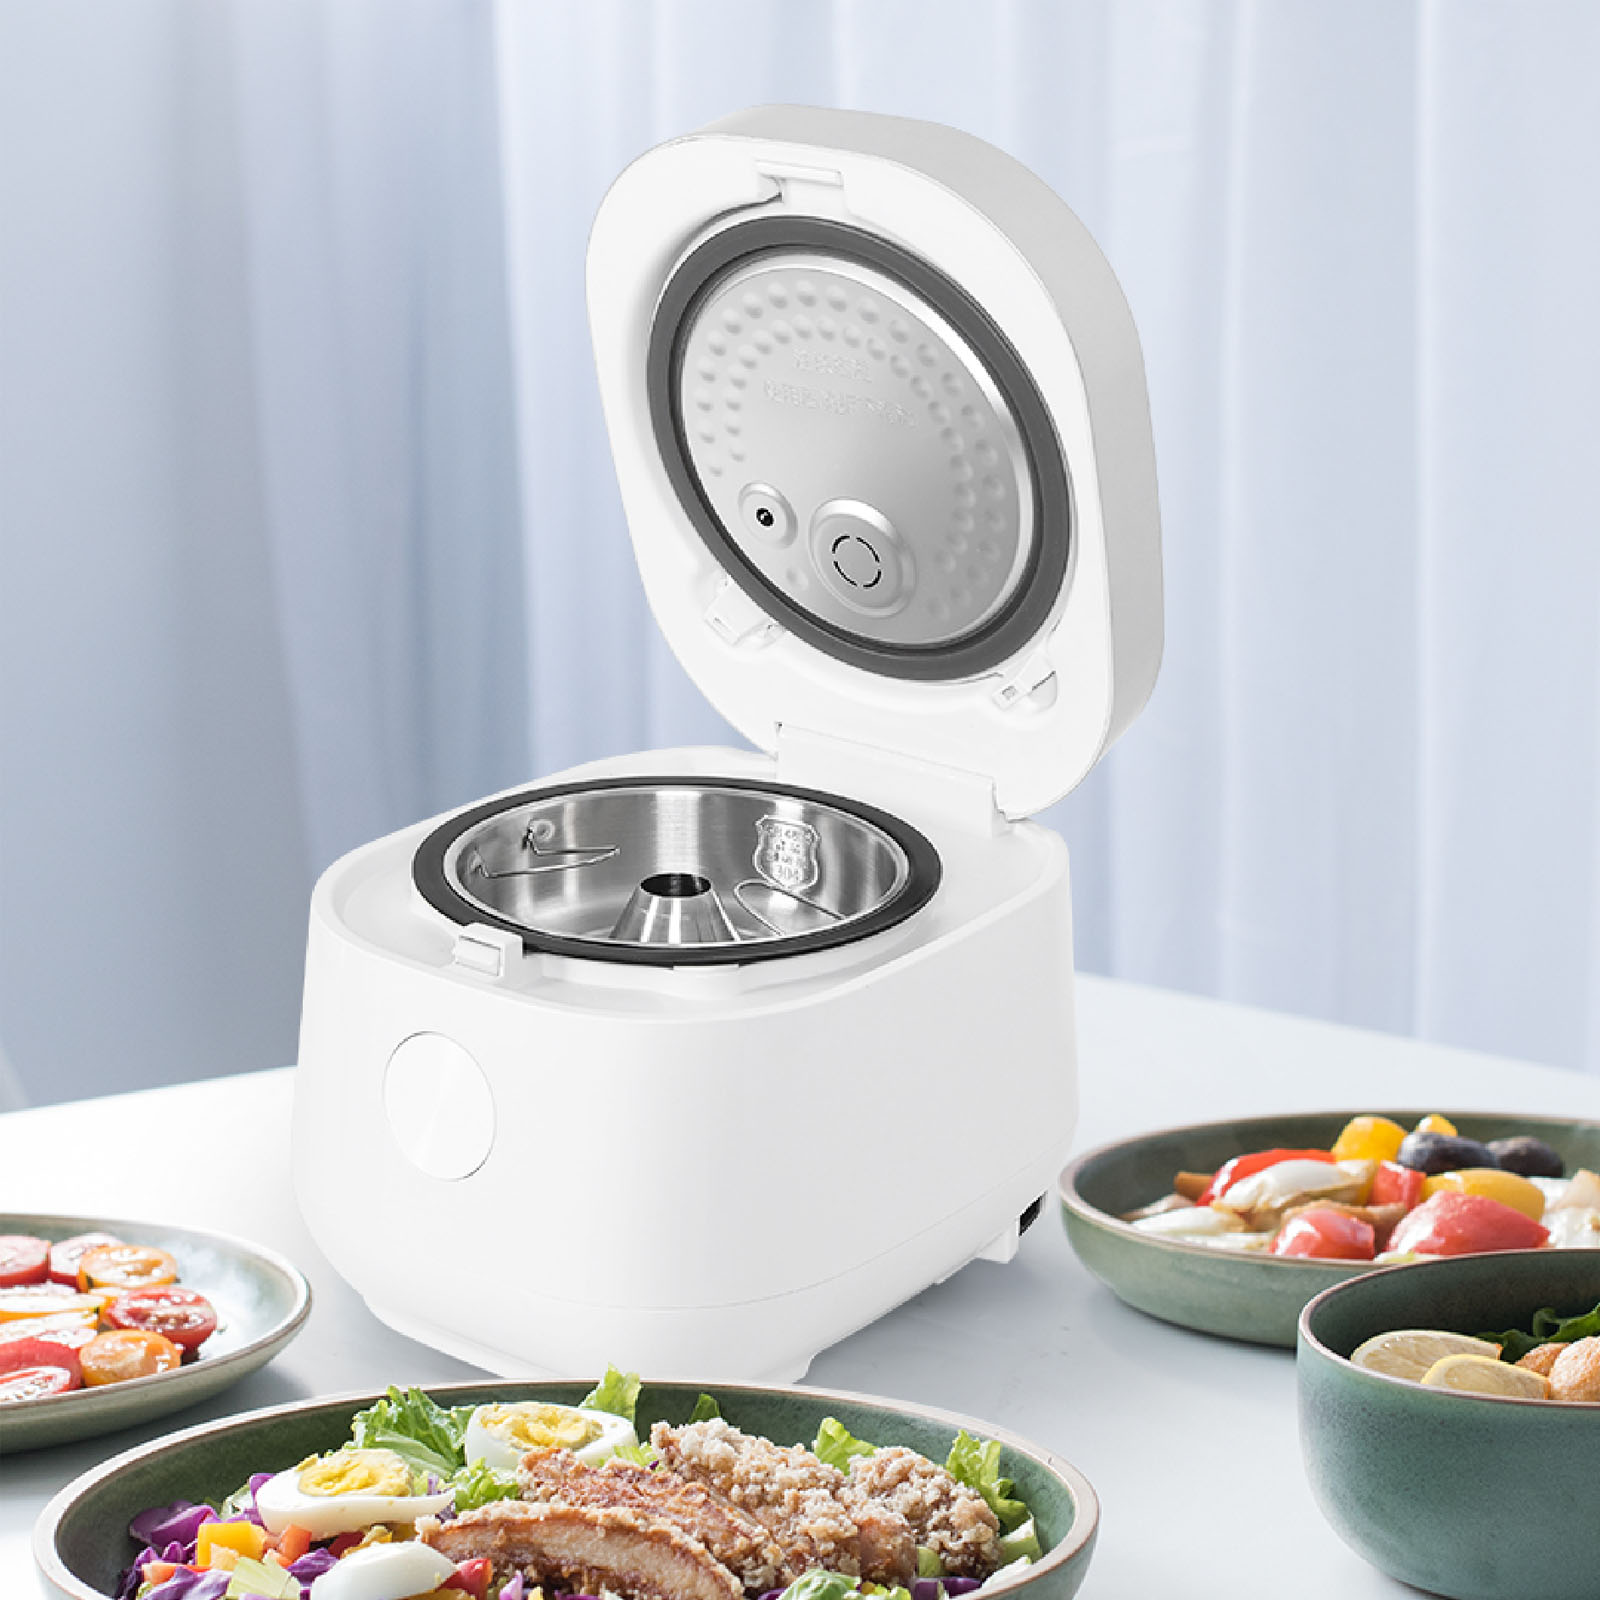 KA0401-02 HOWSTODAY Multifonctionnel Rice Cooker 1